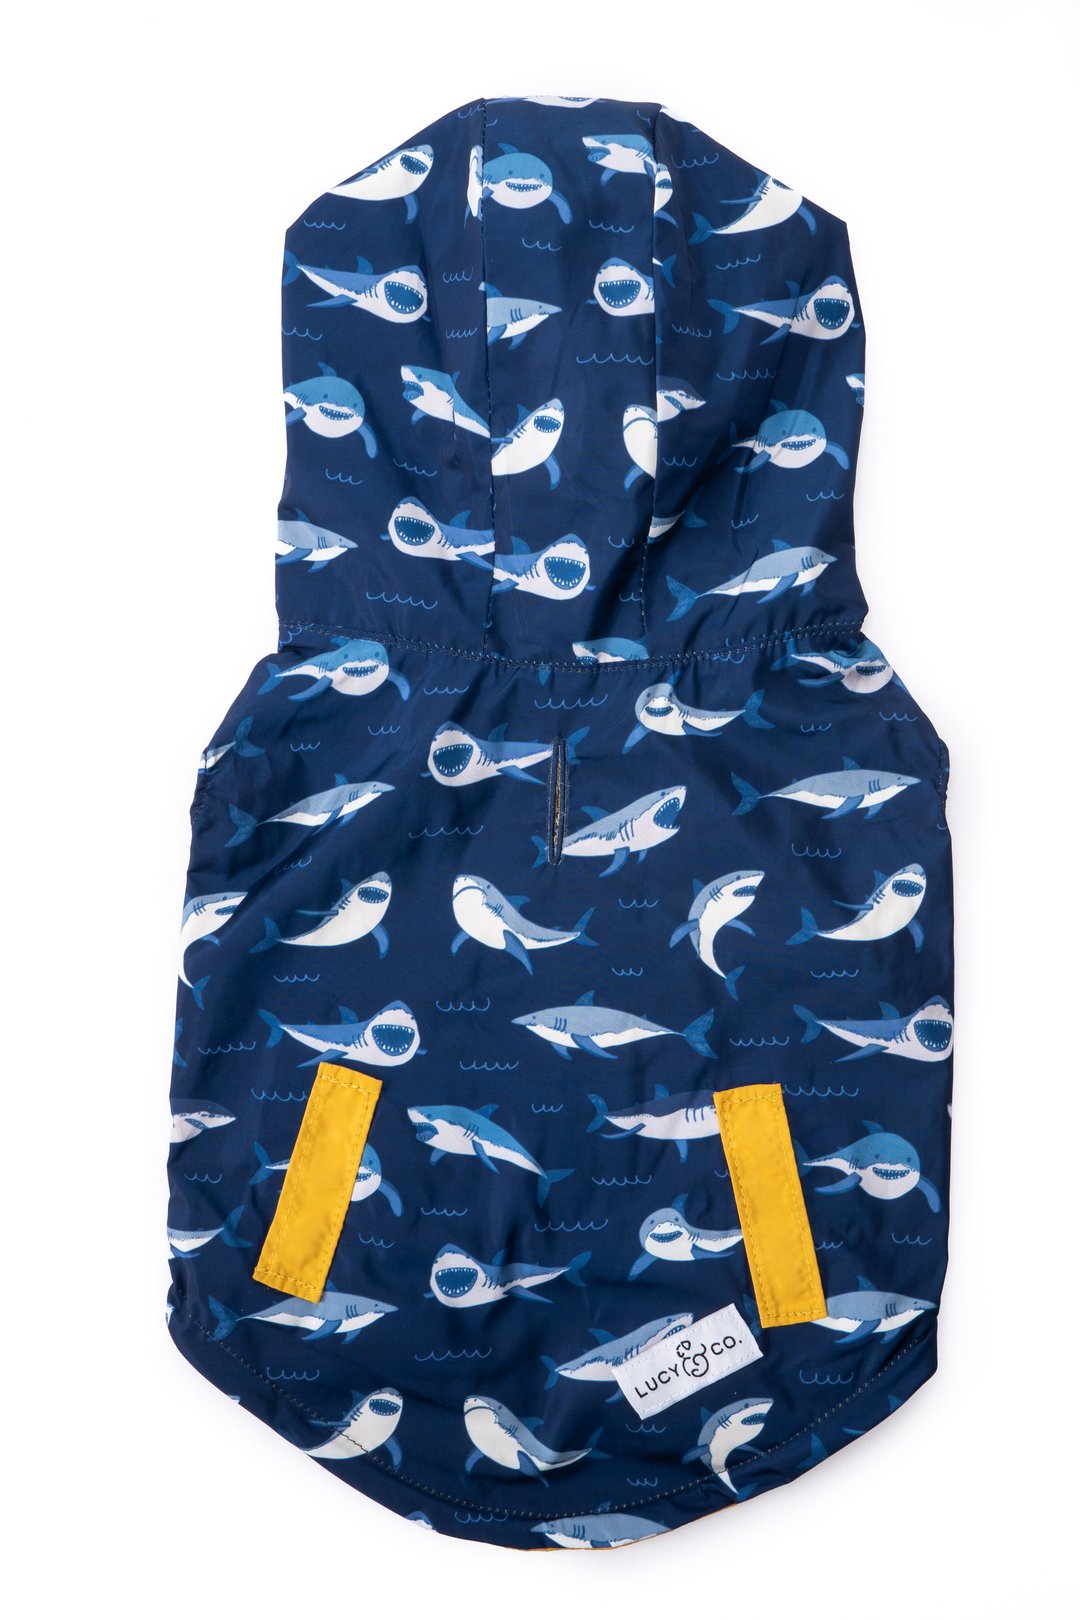 Lucy & Co. - Shark Attack Reversible Raincoat